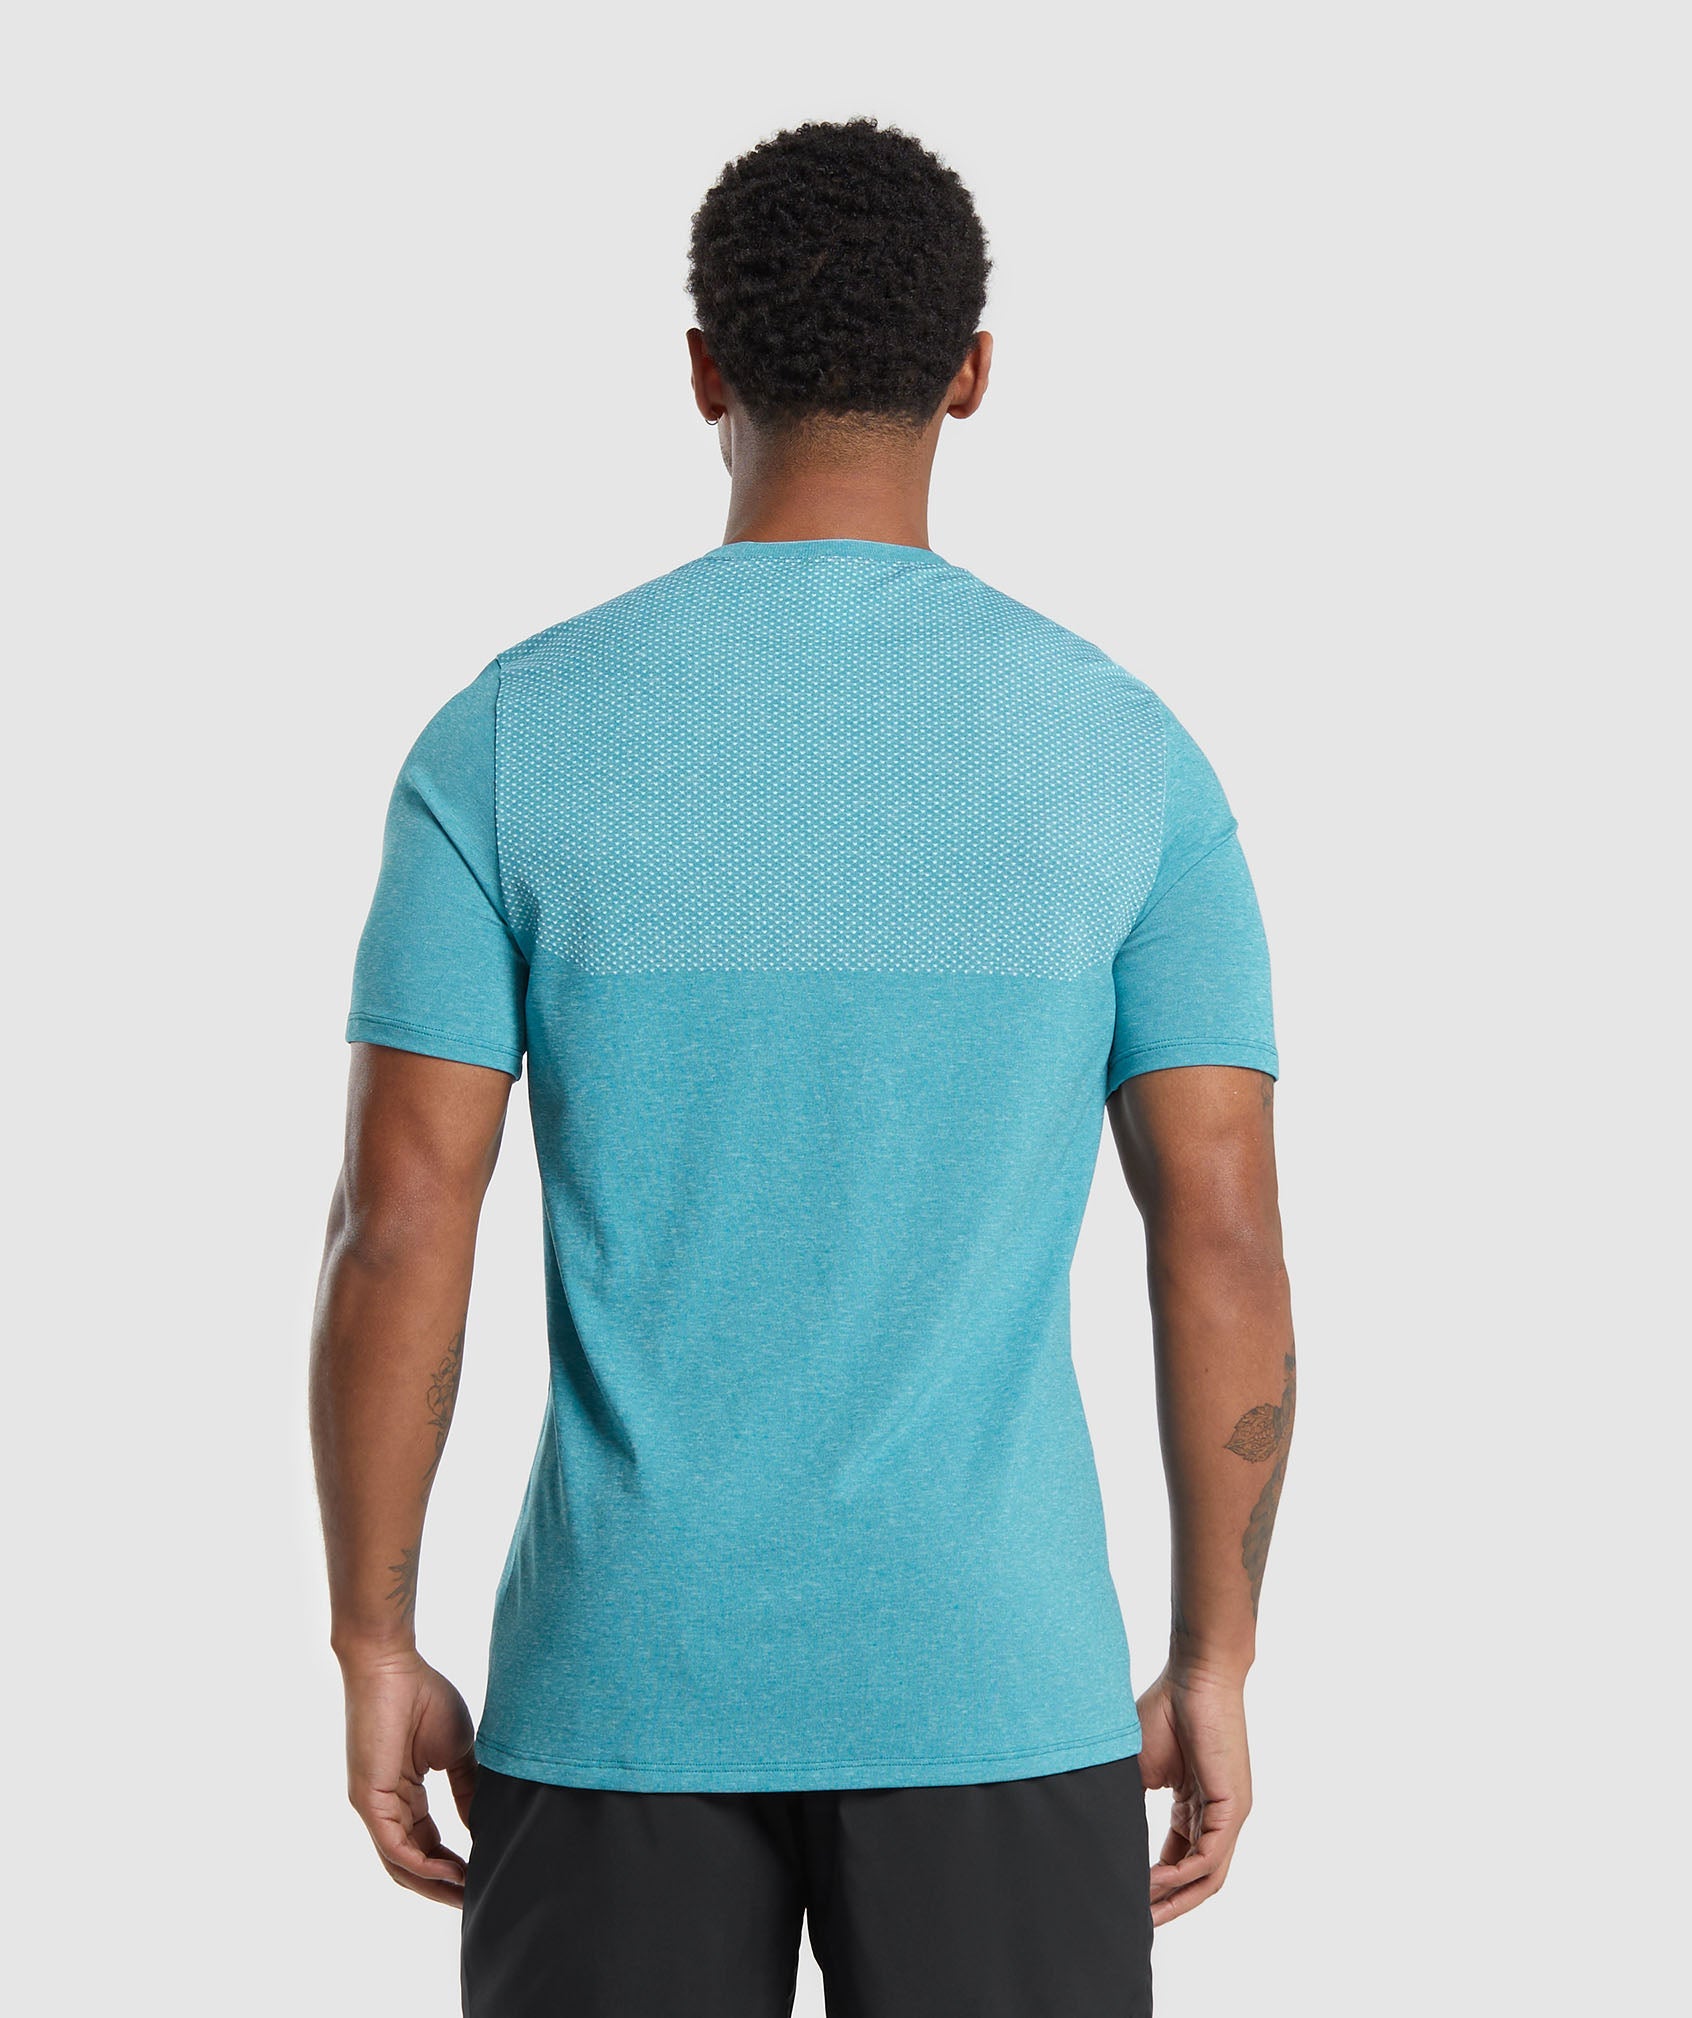 Vital Seamless T-Shirt in Artificial Teal/White Marl - view 2